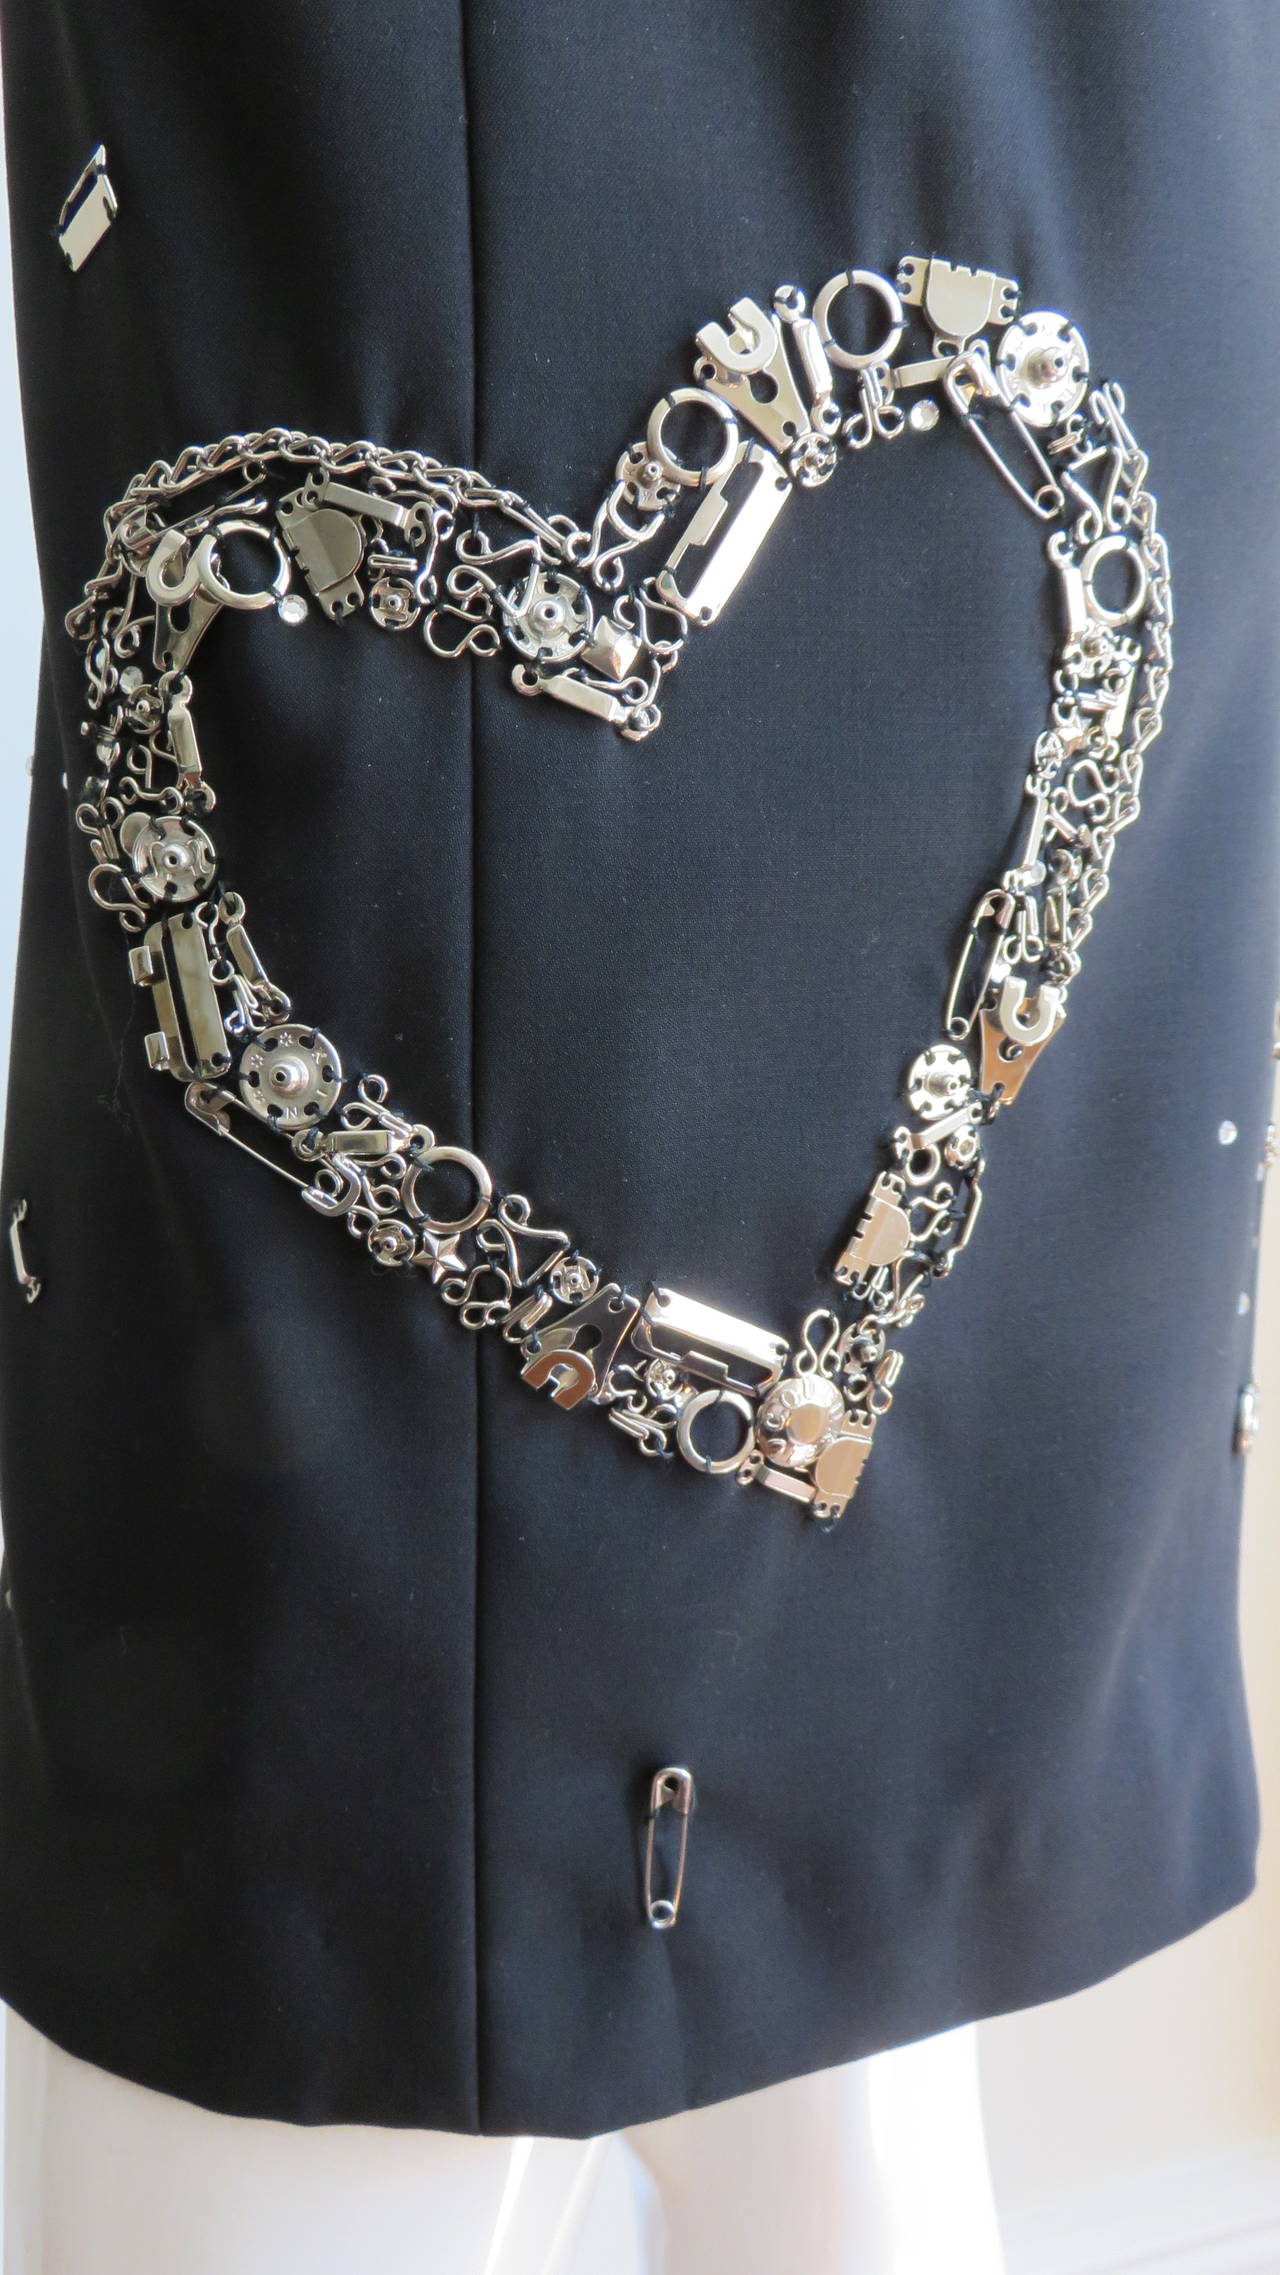 Moschino Couture Dress with Hardware 9